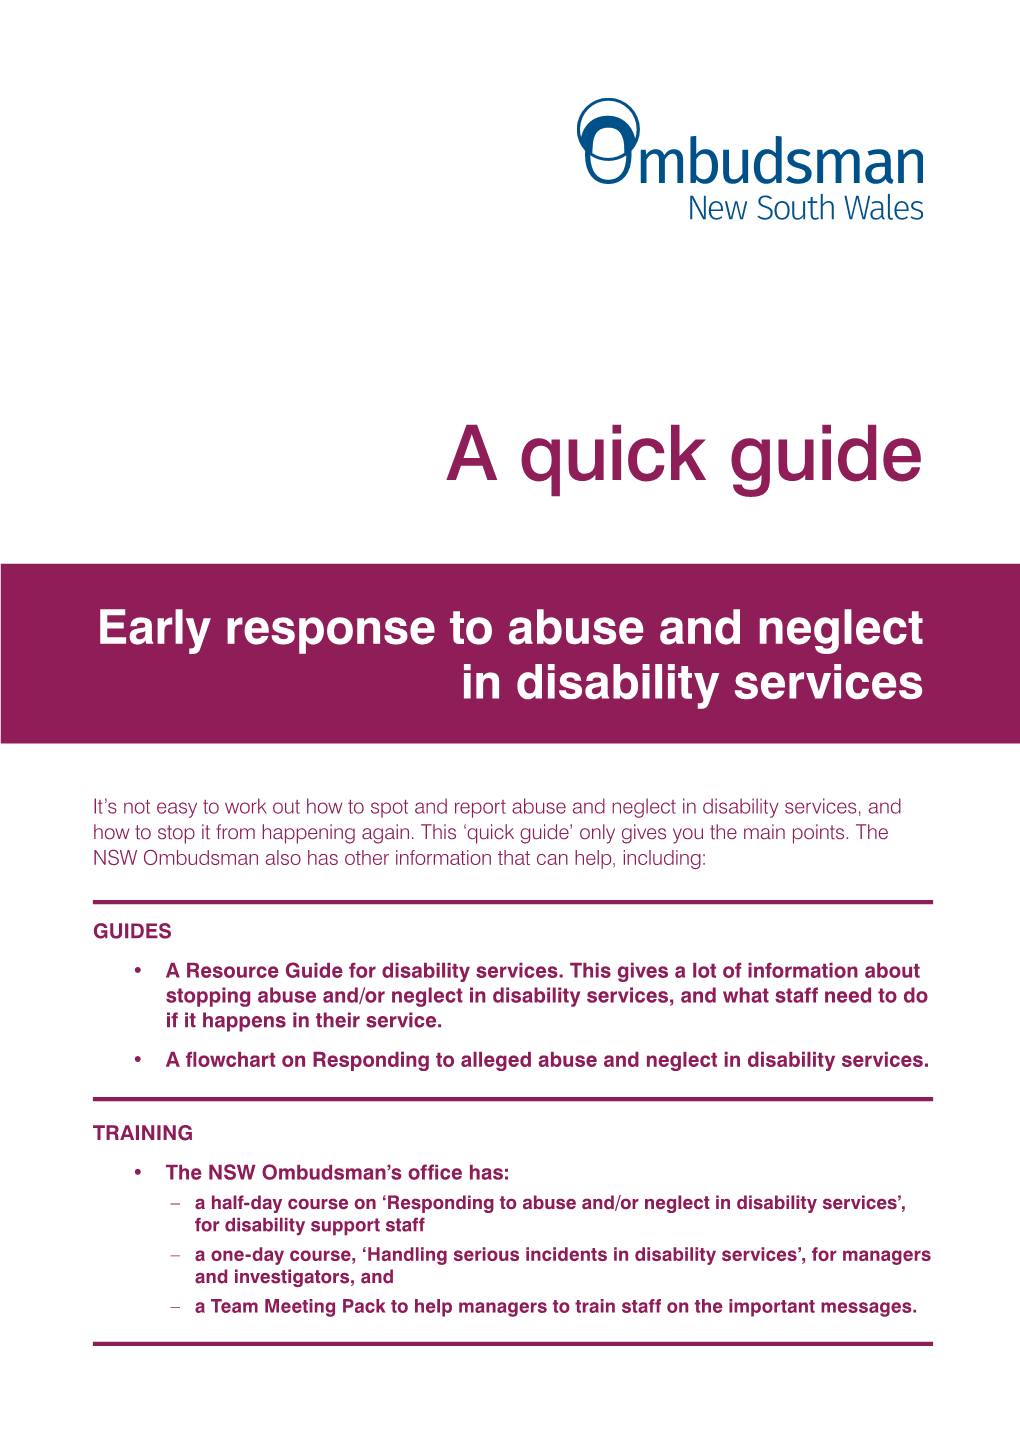 Early Response to Abuse and Neglect in Disability Services